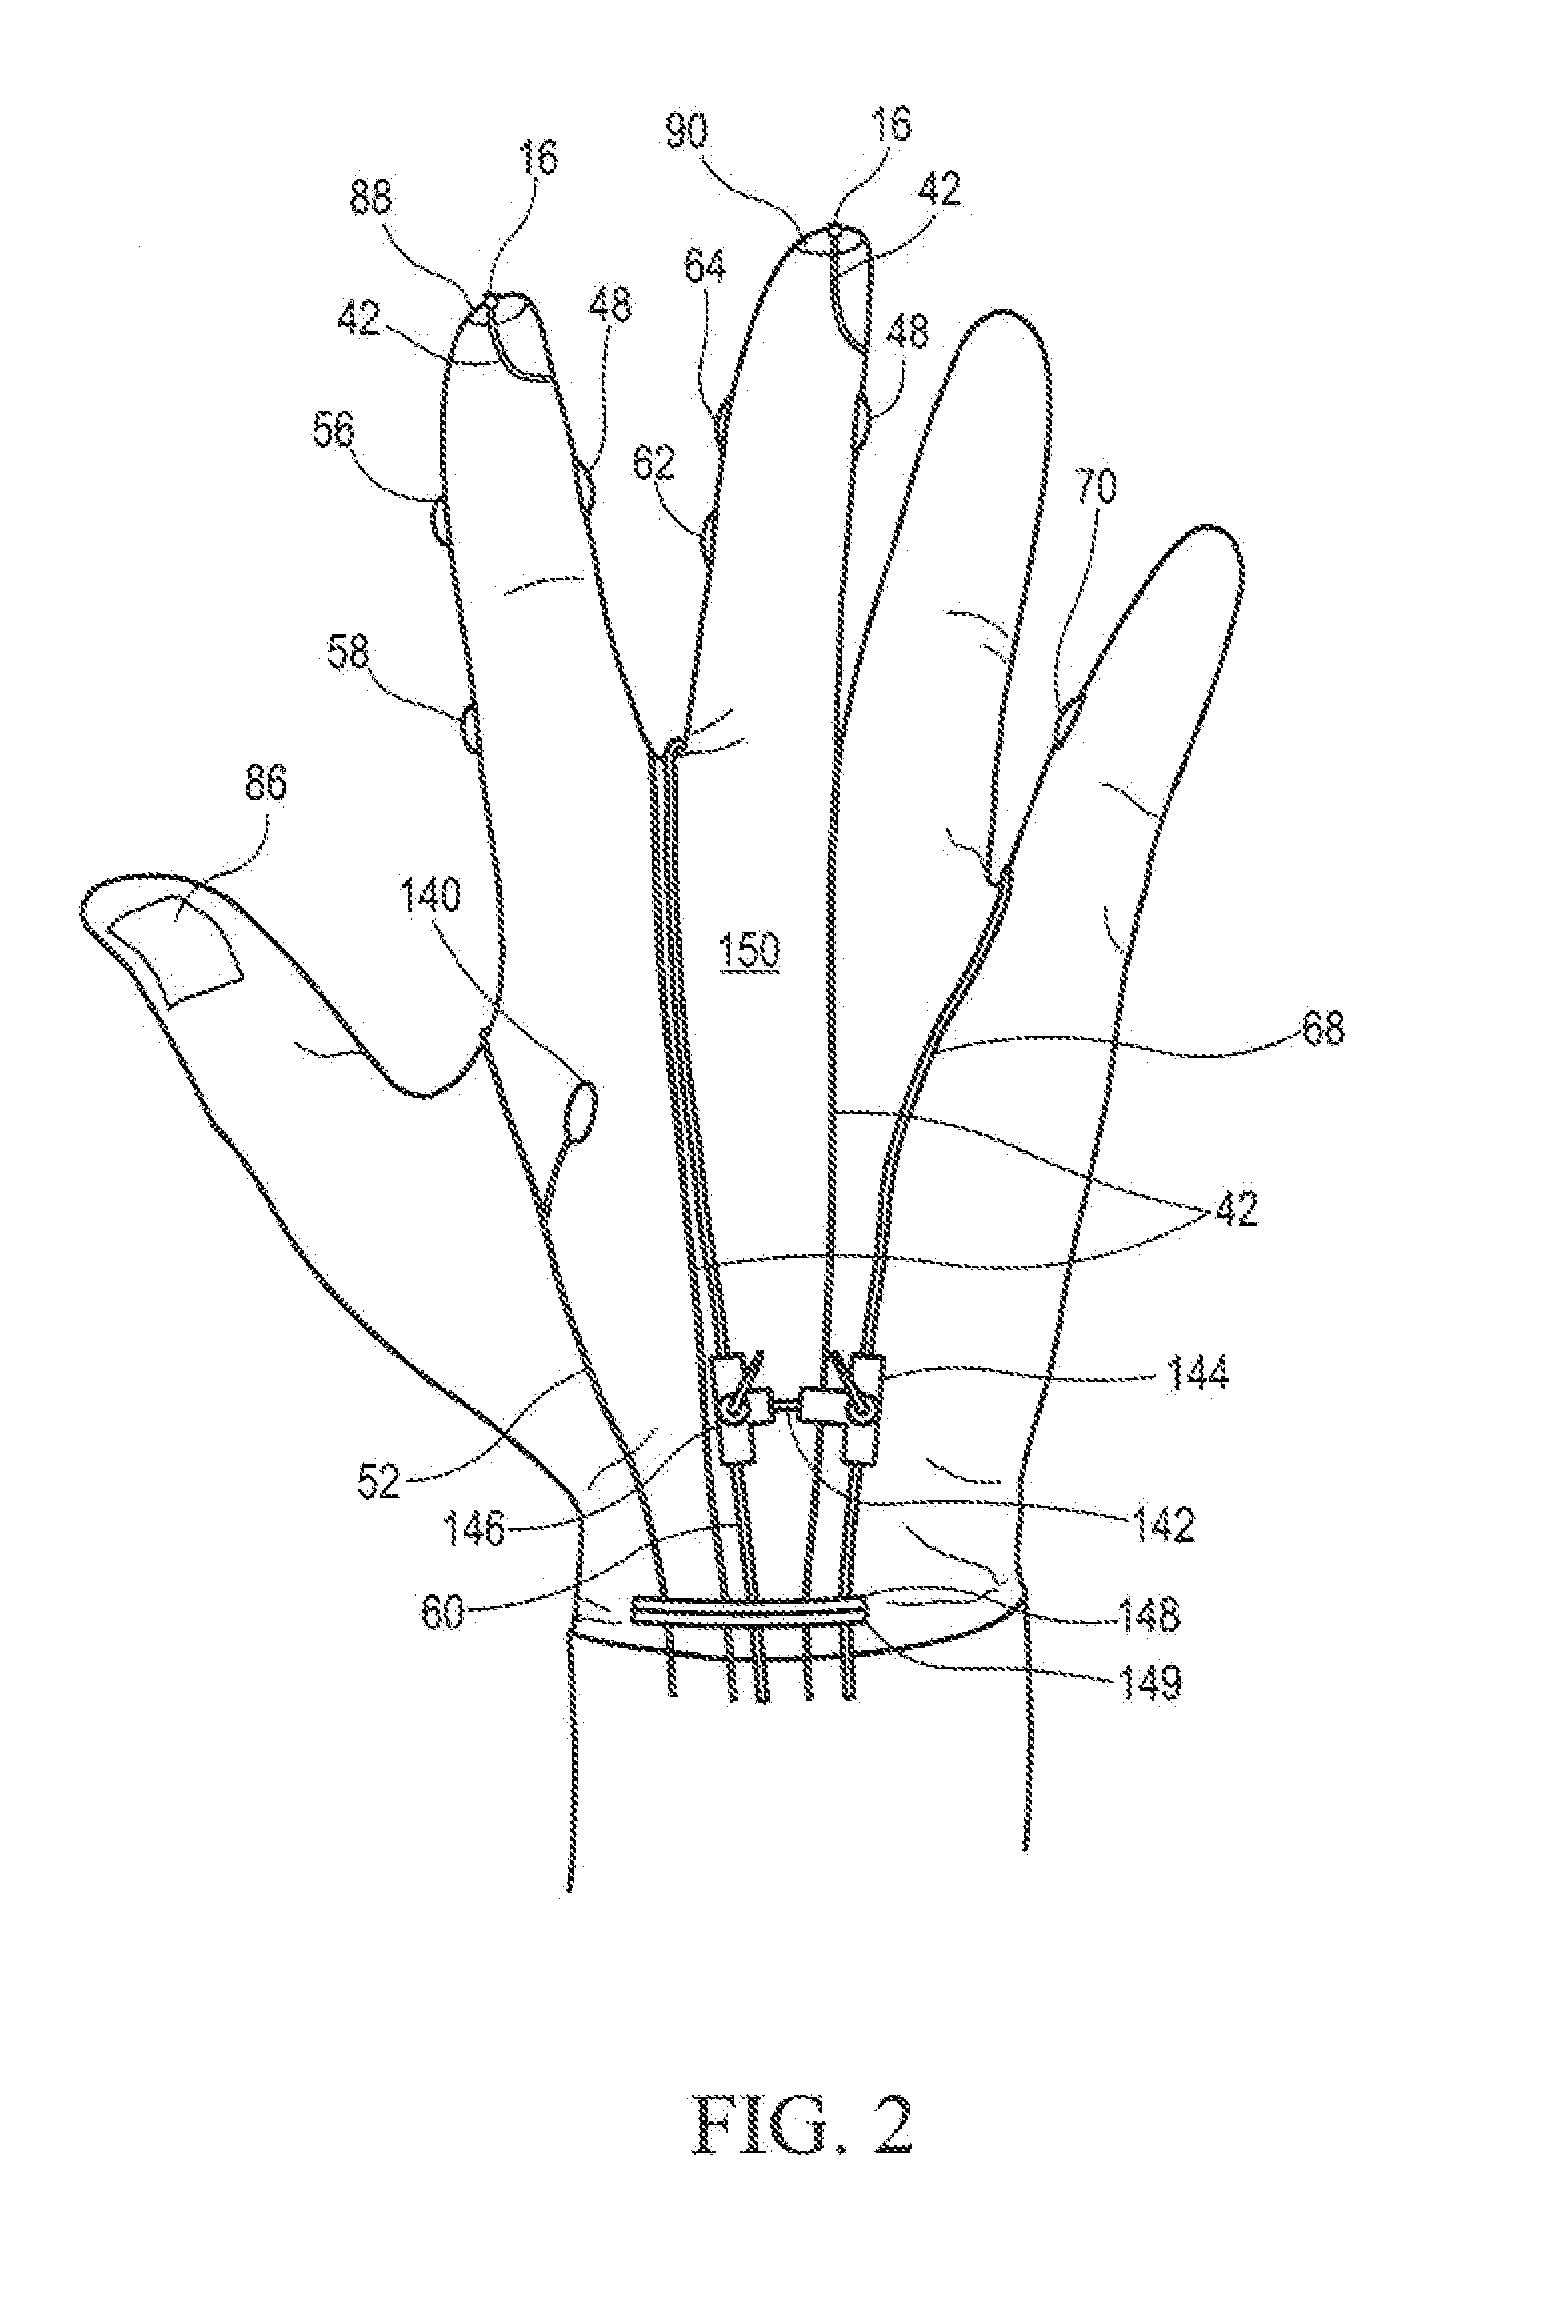 Surgical glove systems and method of using the same